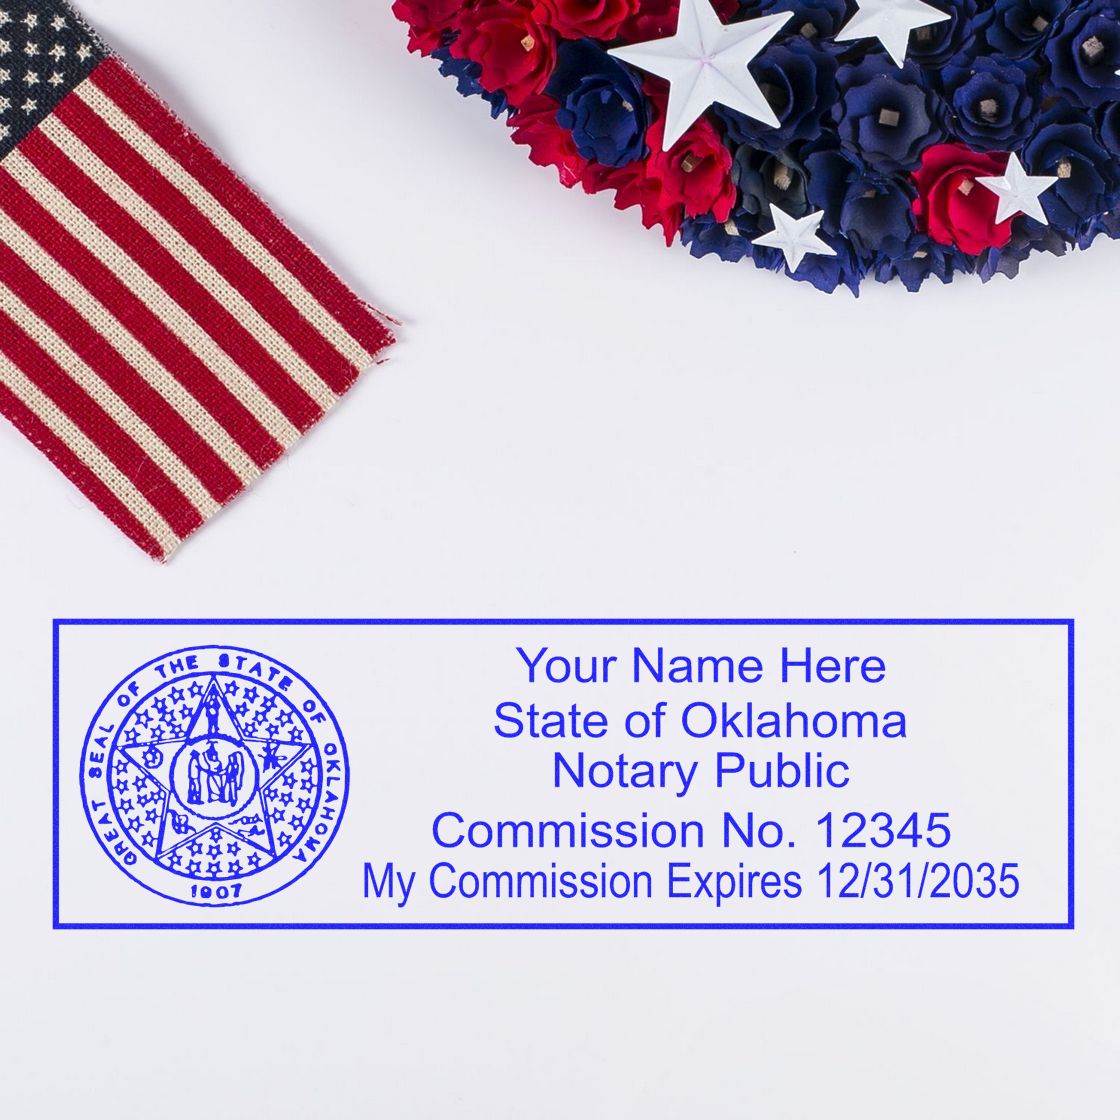 An alternative view of the Heavy-Duty Oklahoma Rectangular Notary Stamp stamped on a sheet of paper showing the image in use